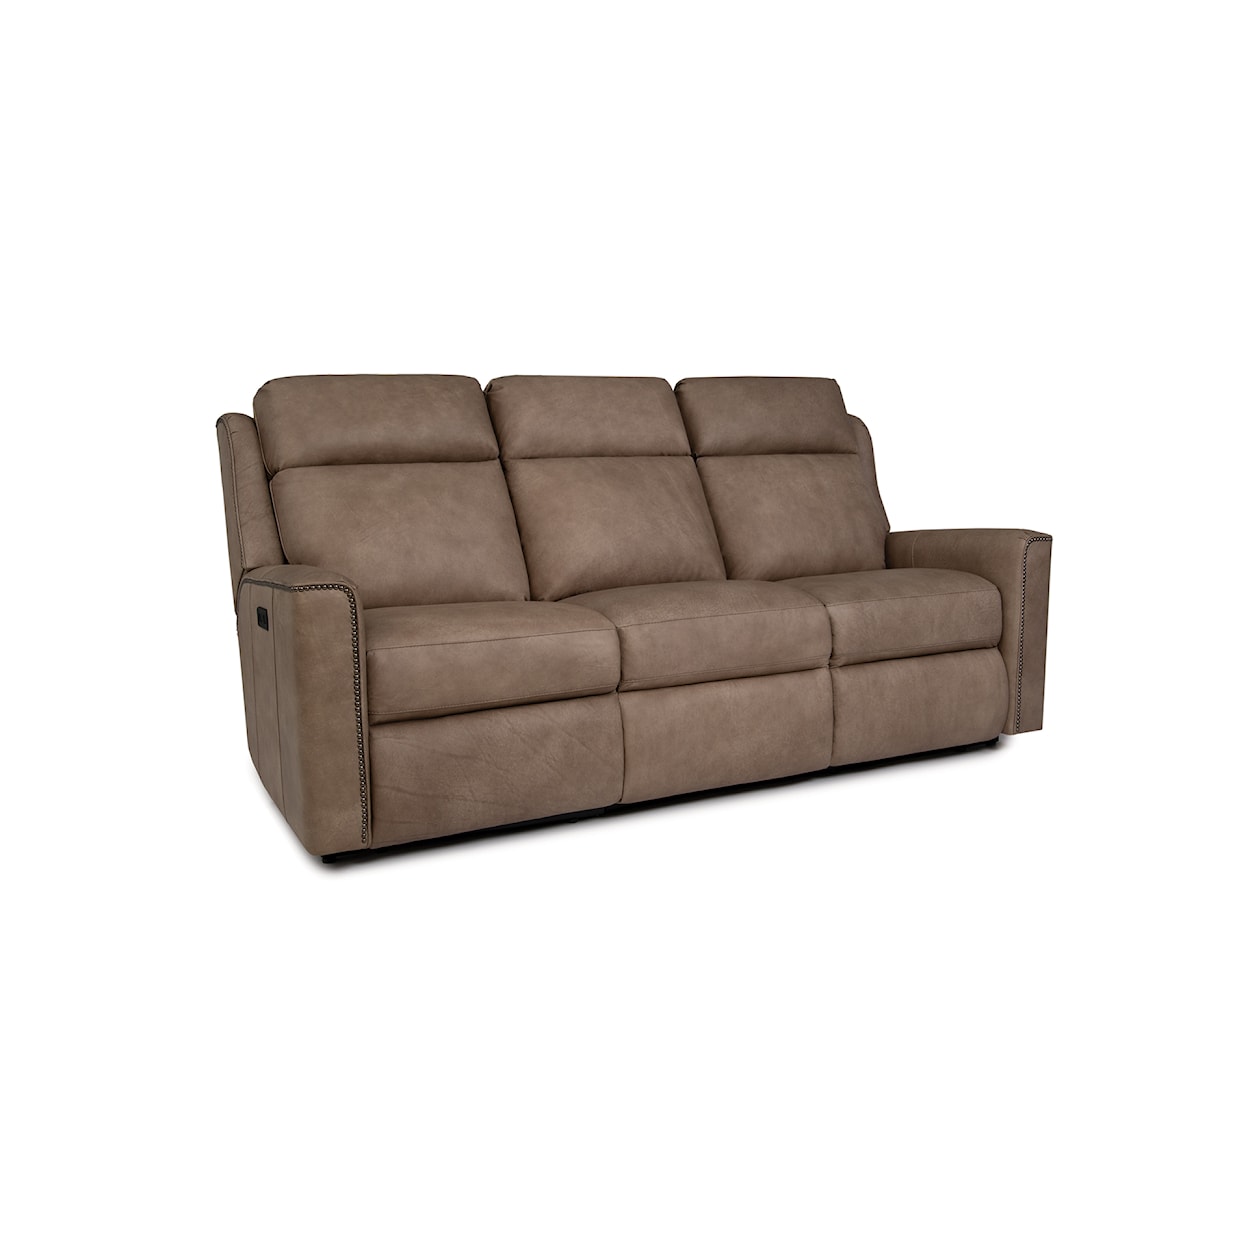 Smith Brothers 423 Power Reclining Sectional Sofa